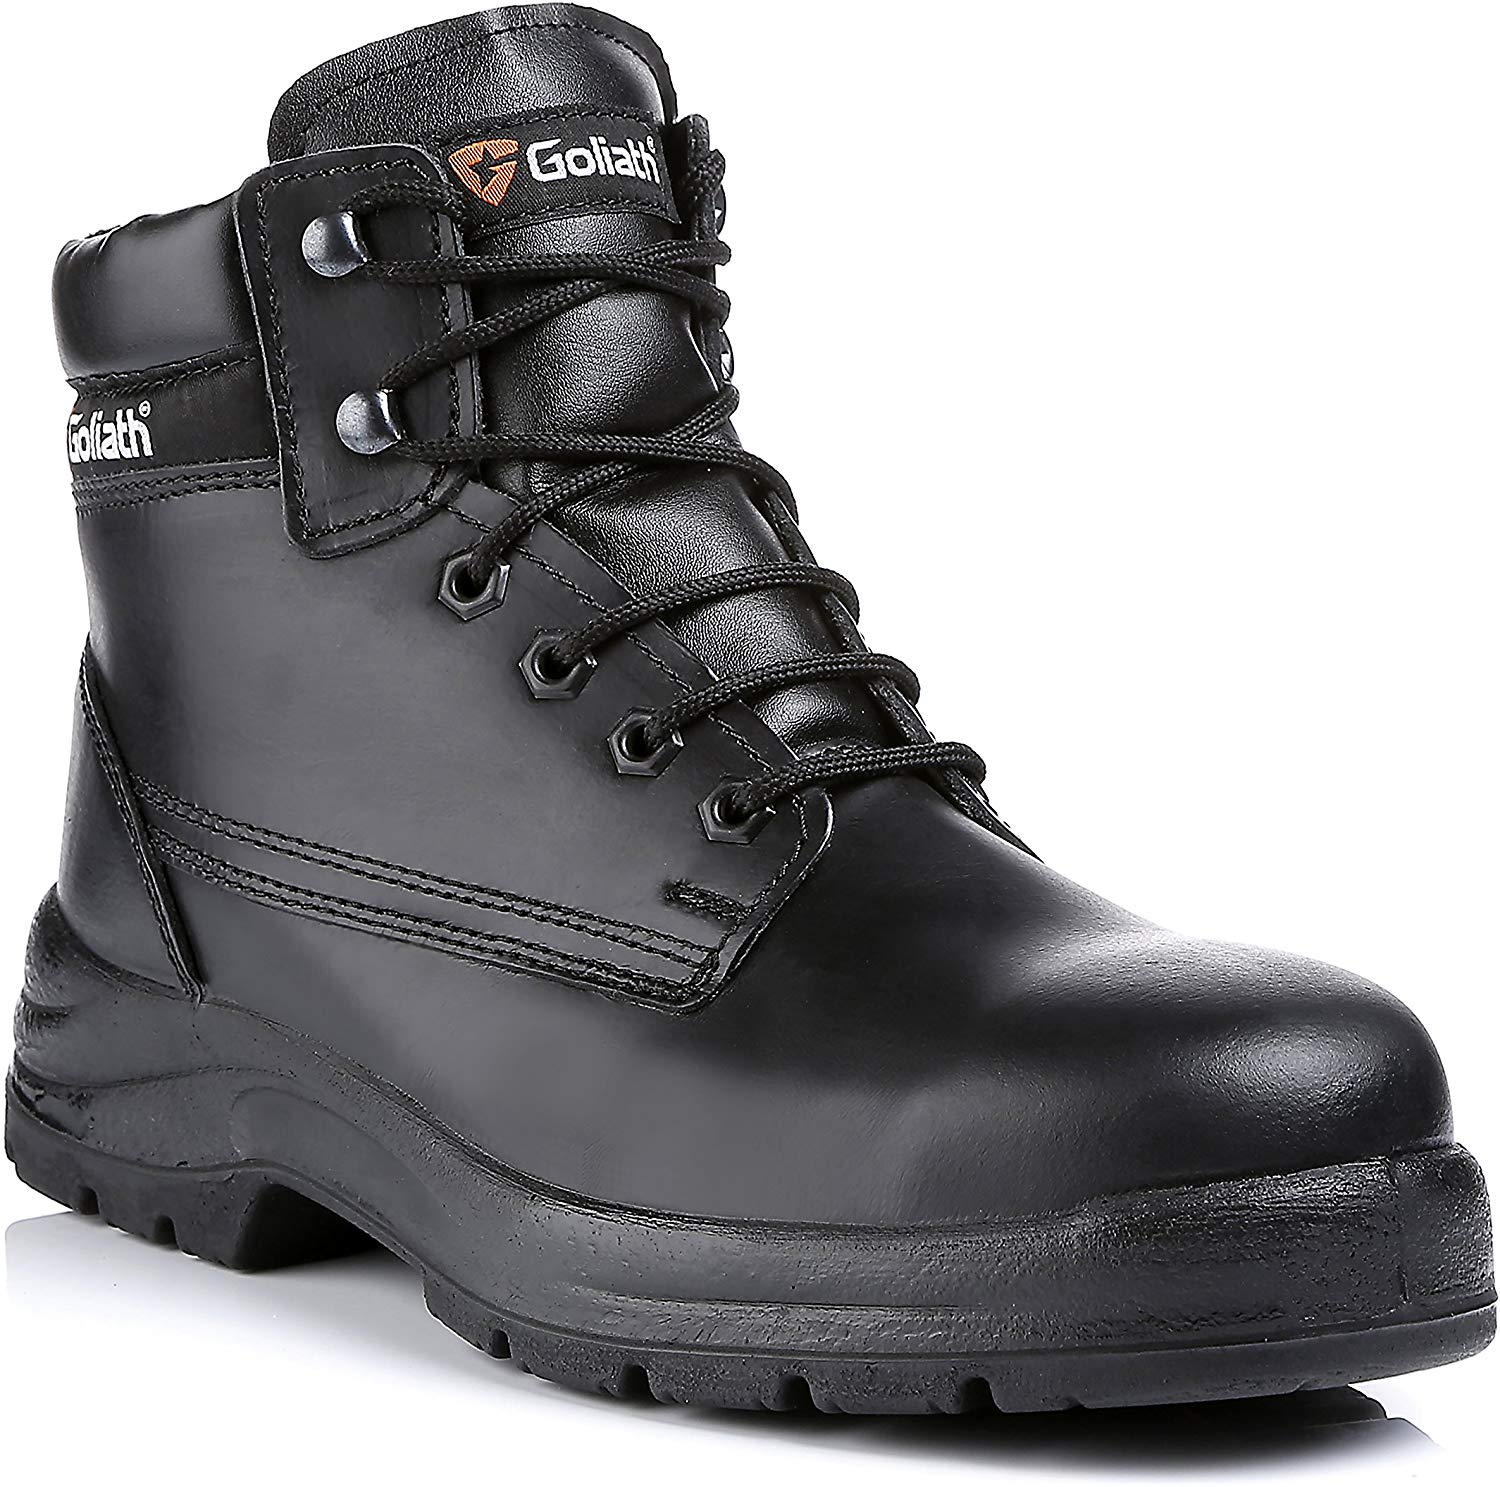 goliath foundry boots